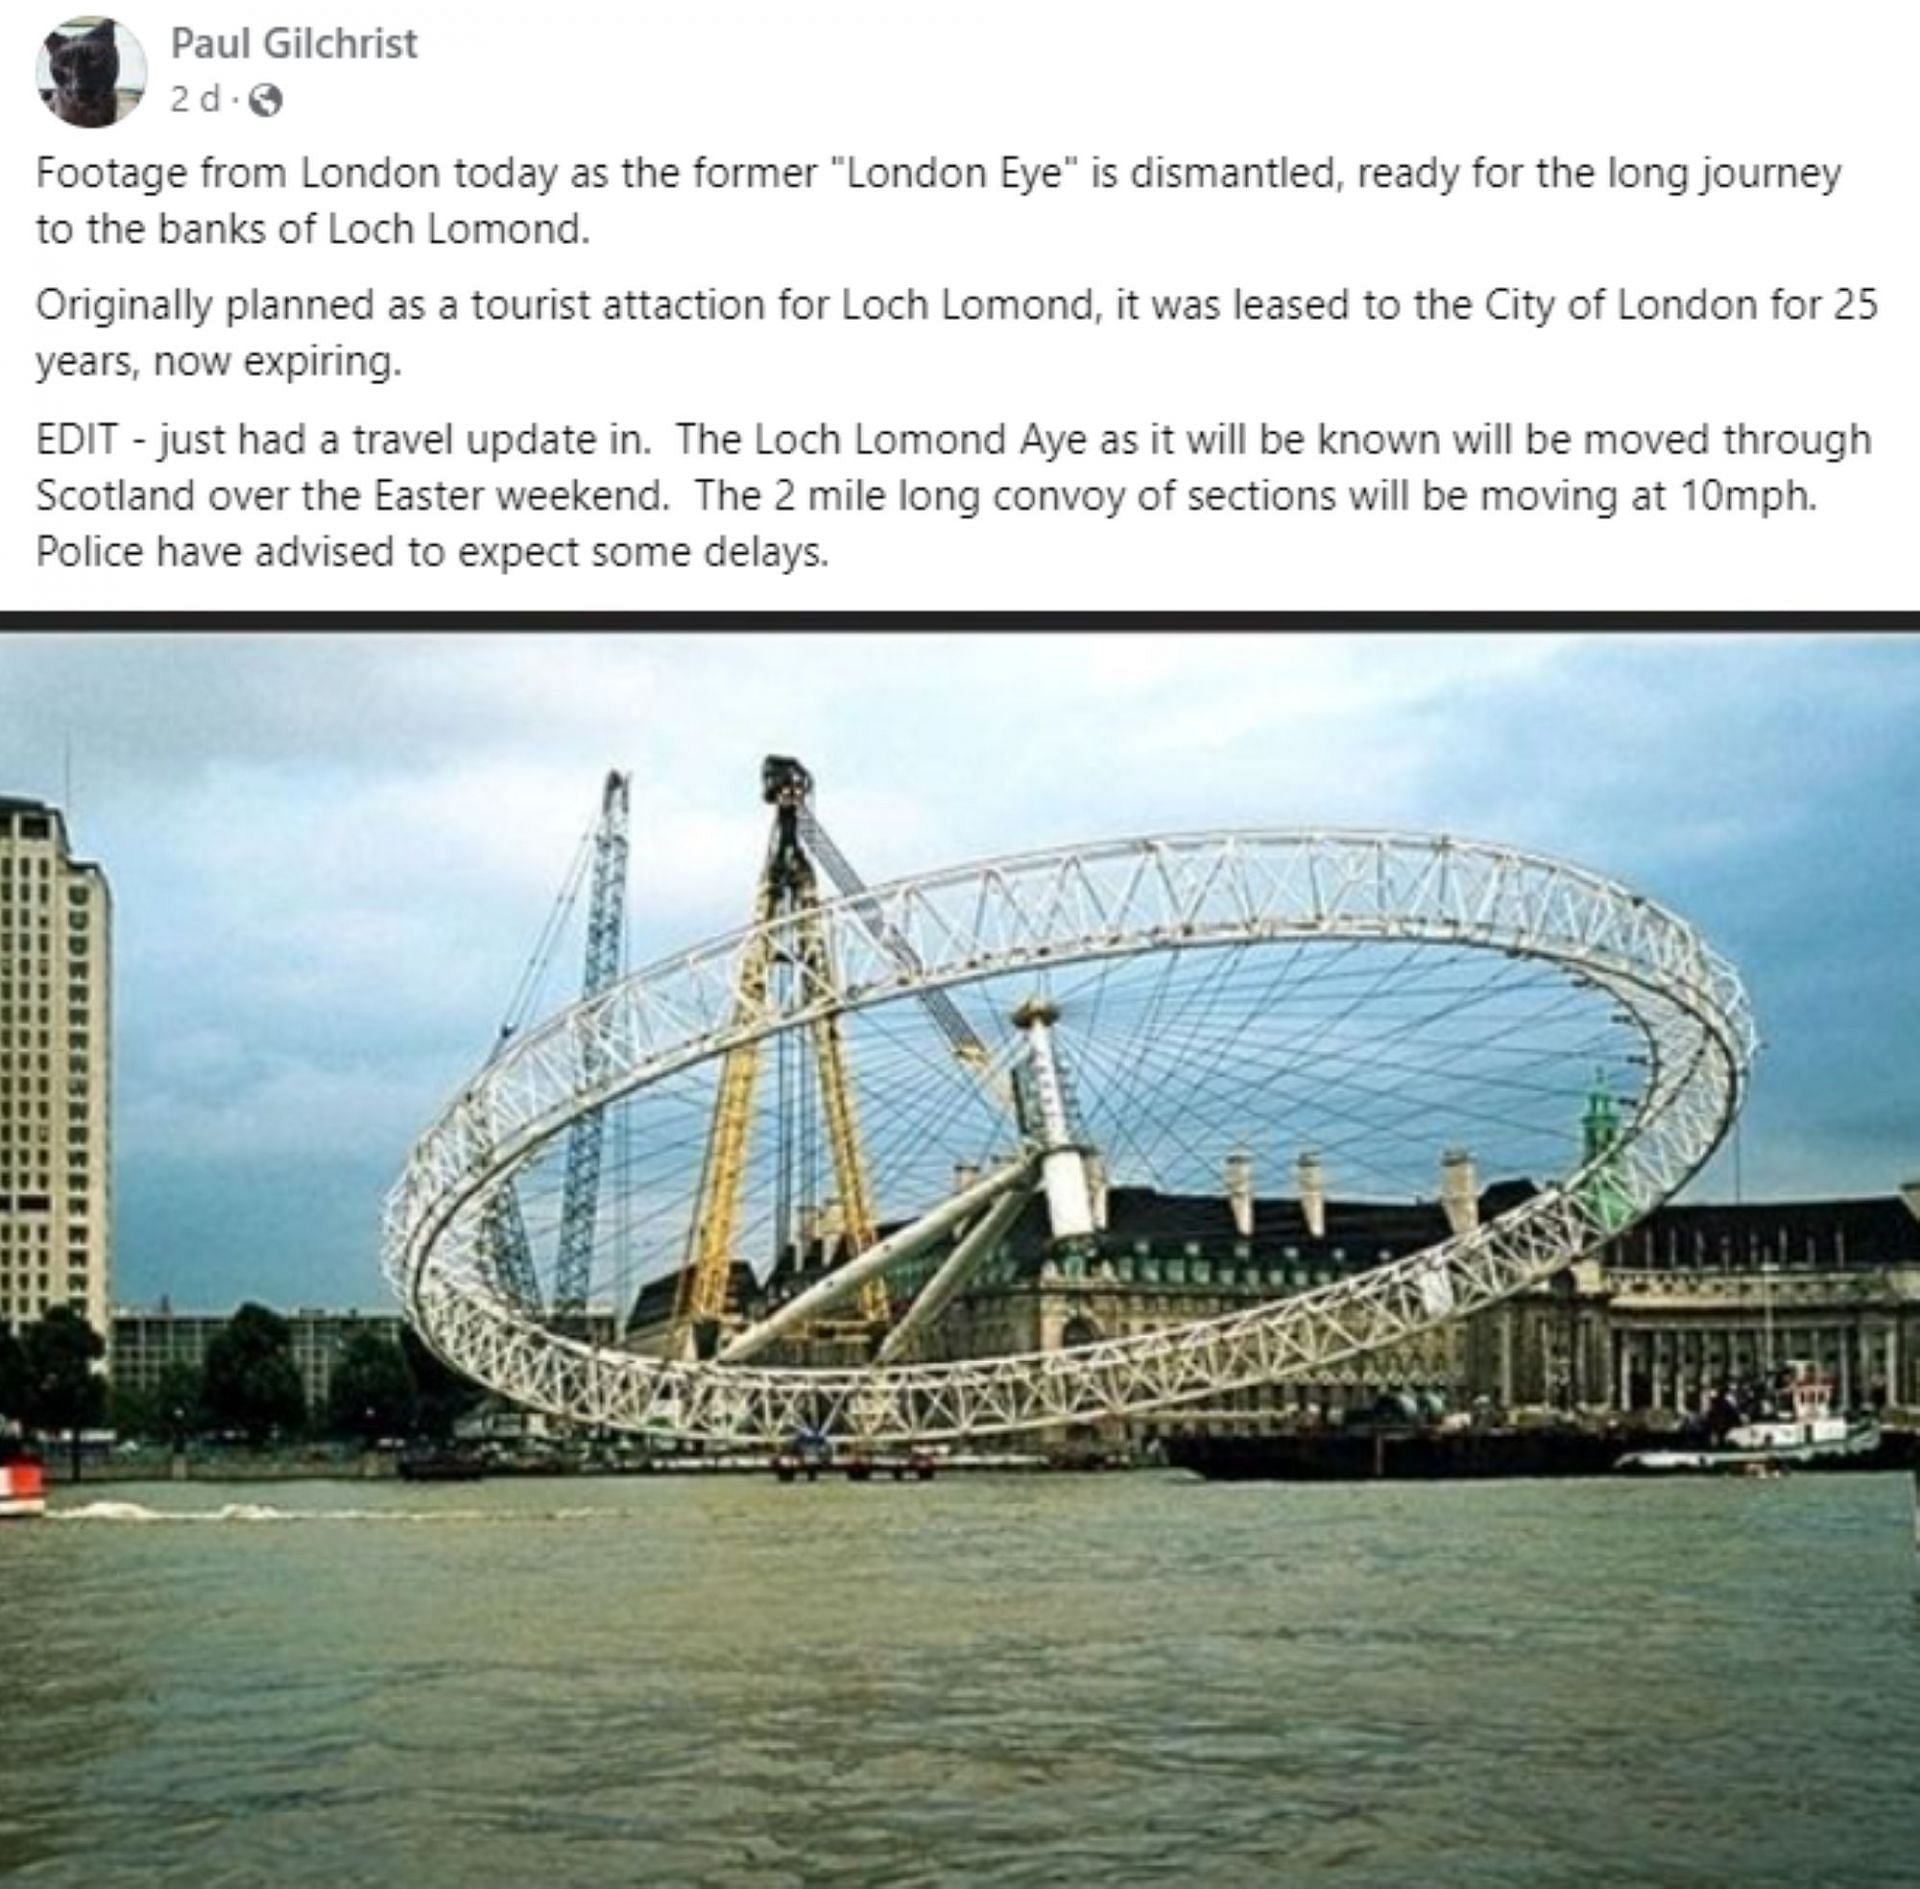 Facebook user claims that the London tourist site is being moved to Scotland (Image via Facebook)